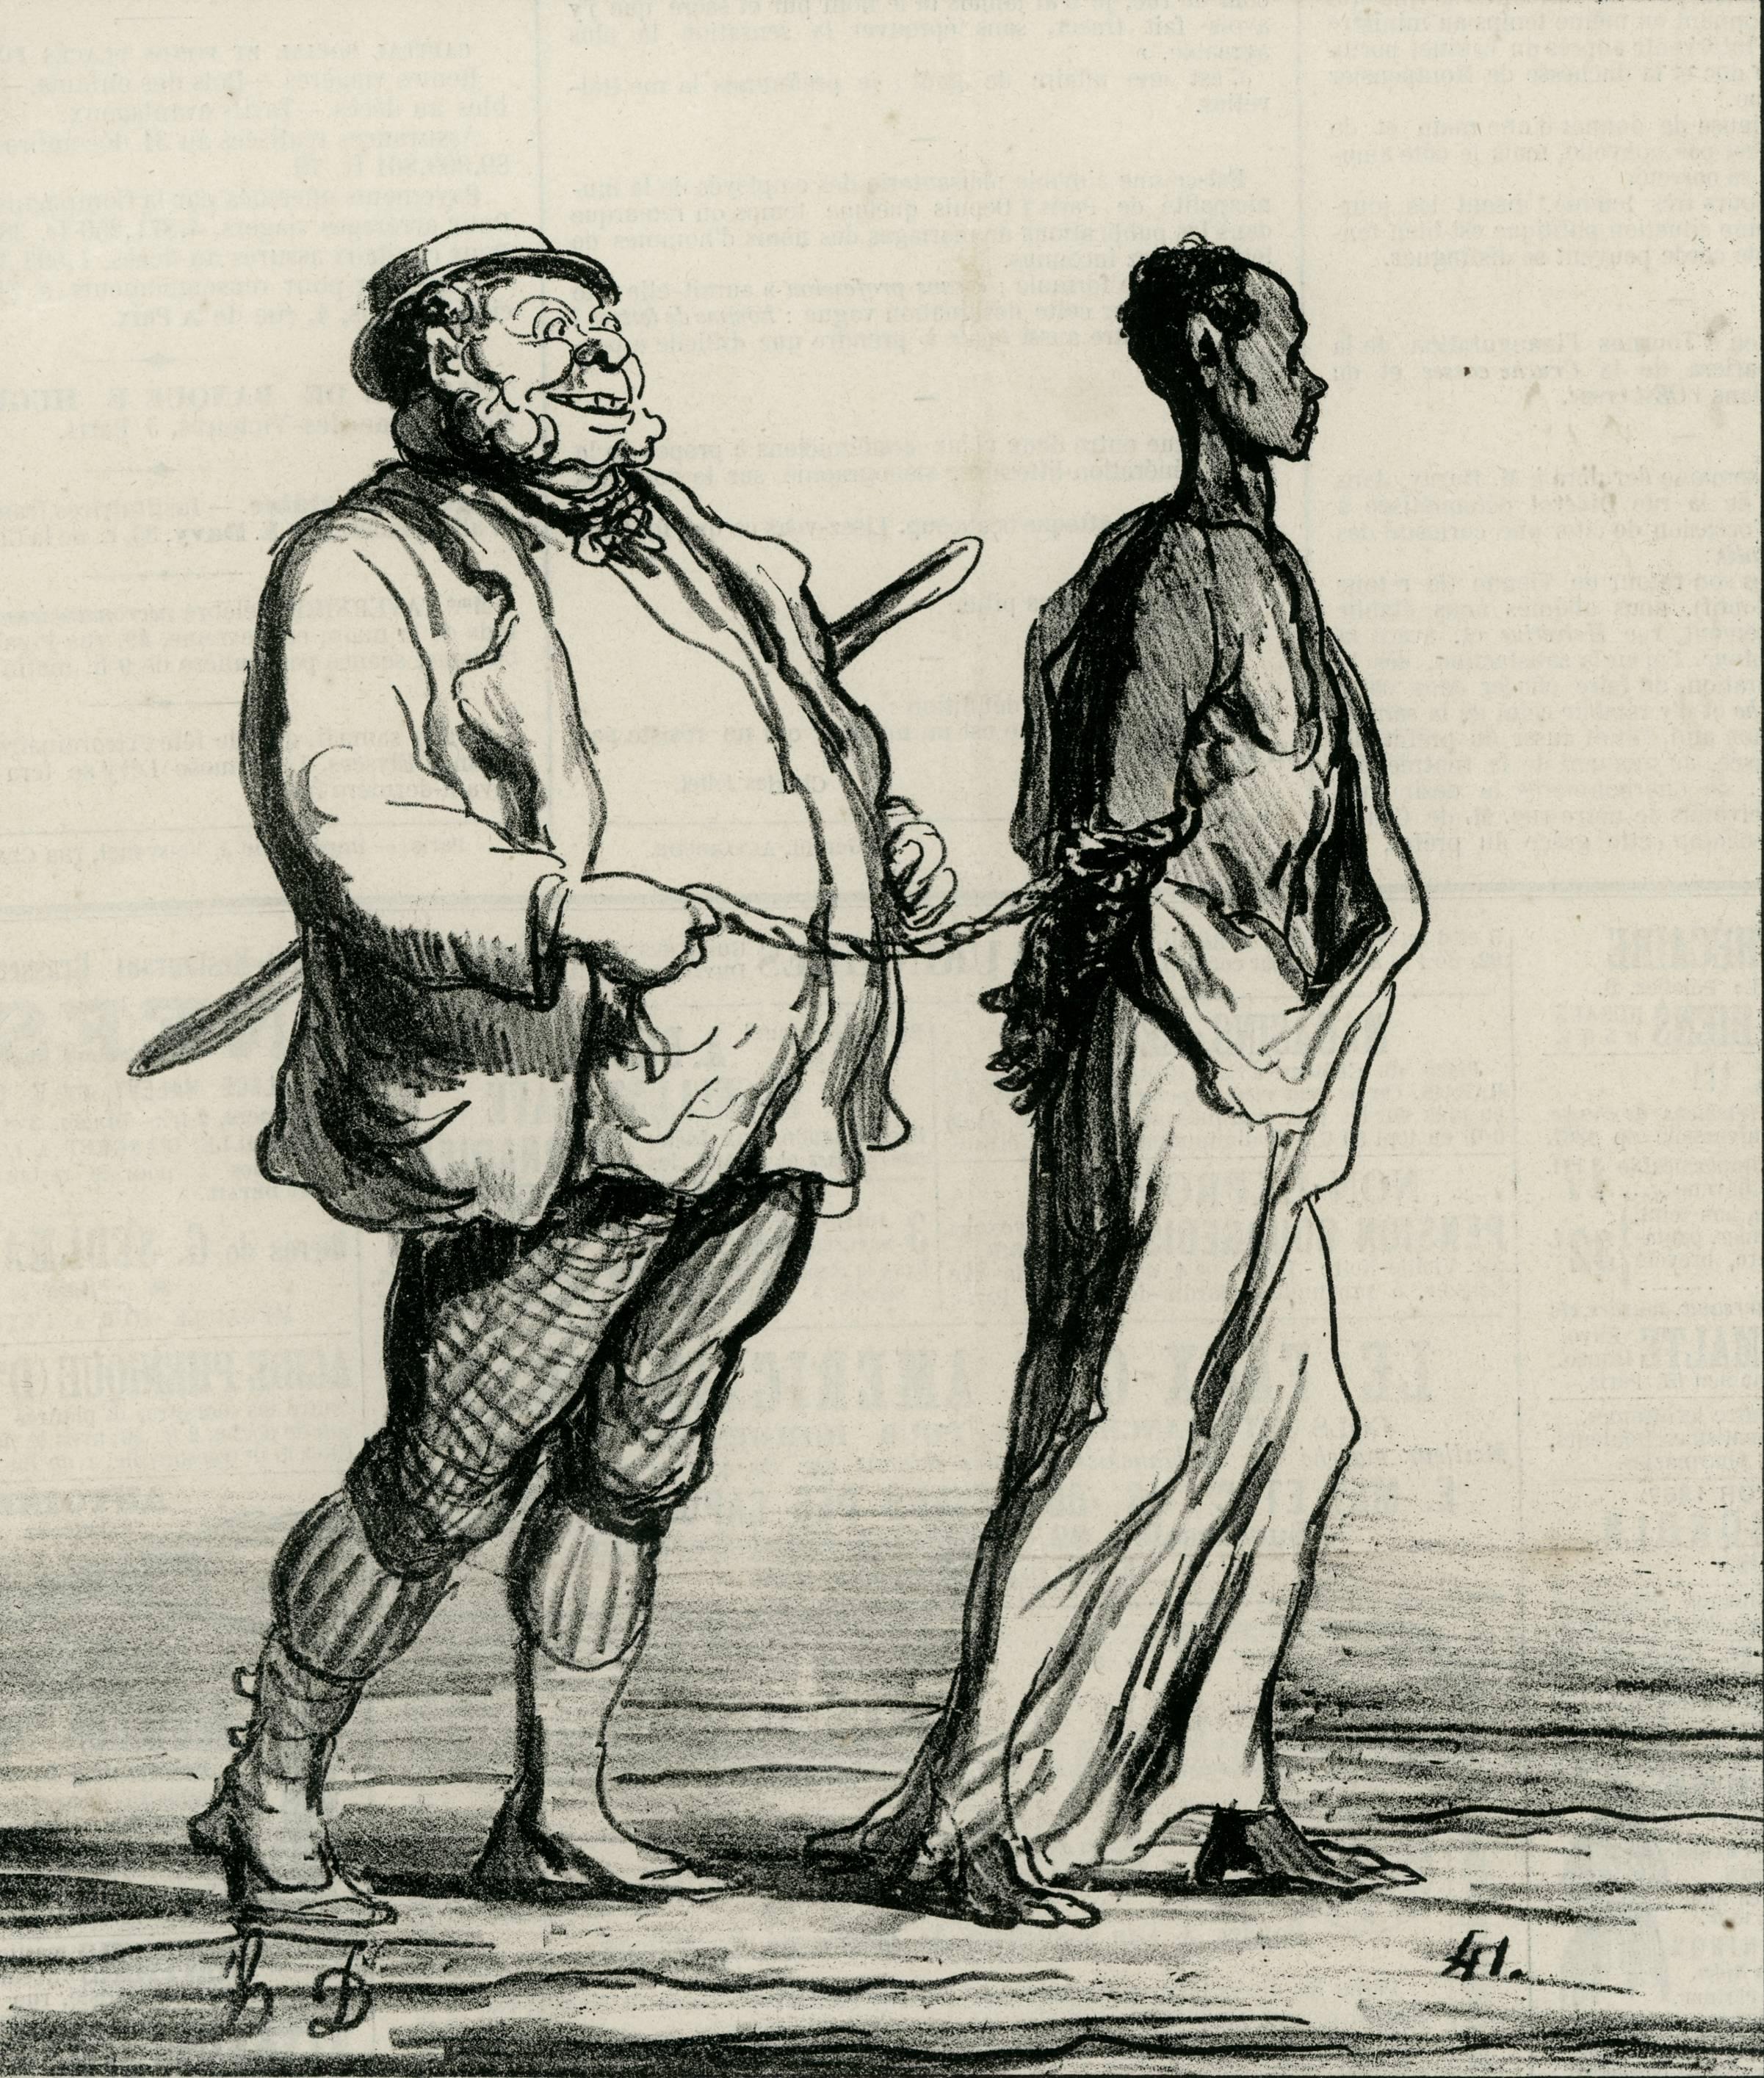 Honoré Daumier Portrait Print - John Bull vows that he is tied to the son of Theodorus by an indissoluble band.